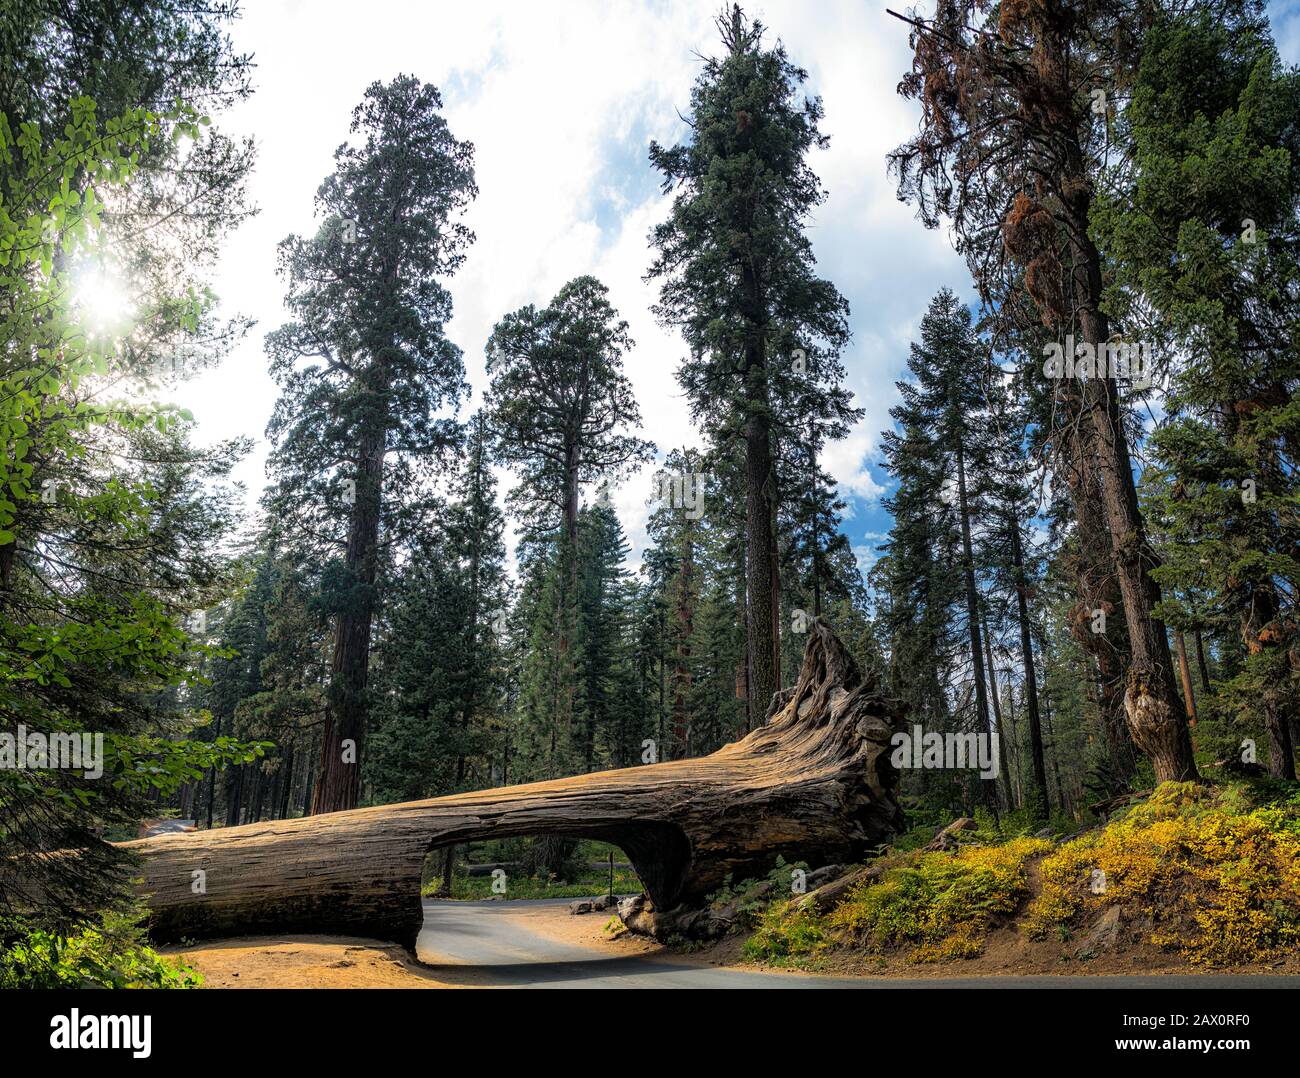 Panoramic view of famous Tunnel Log with Crescent Meadow Road in Giant Forest on a beautiful moody cloudy day, Sequoia National Park, California, USA Stock Photo